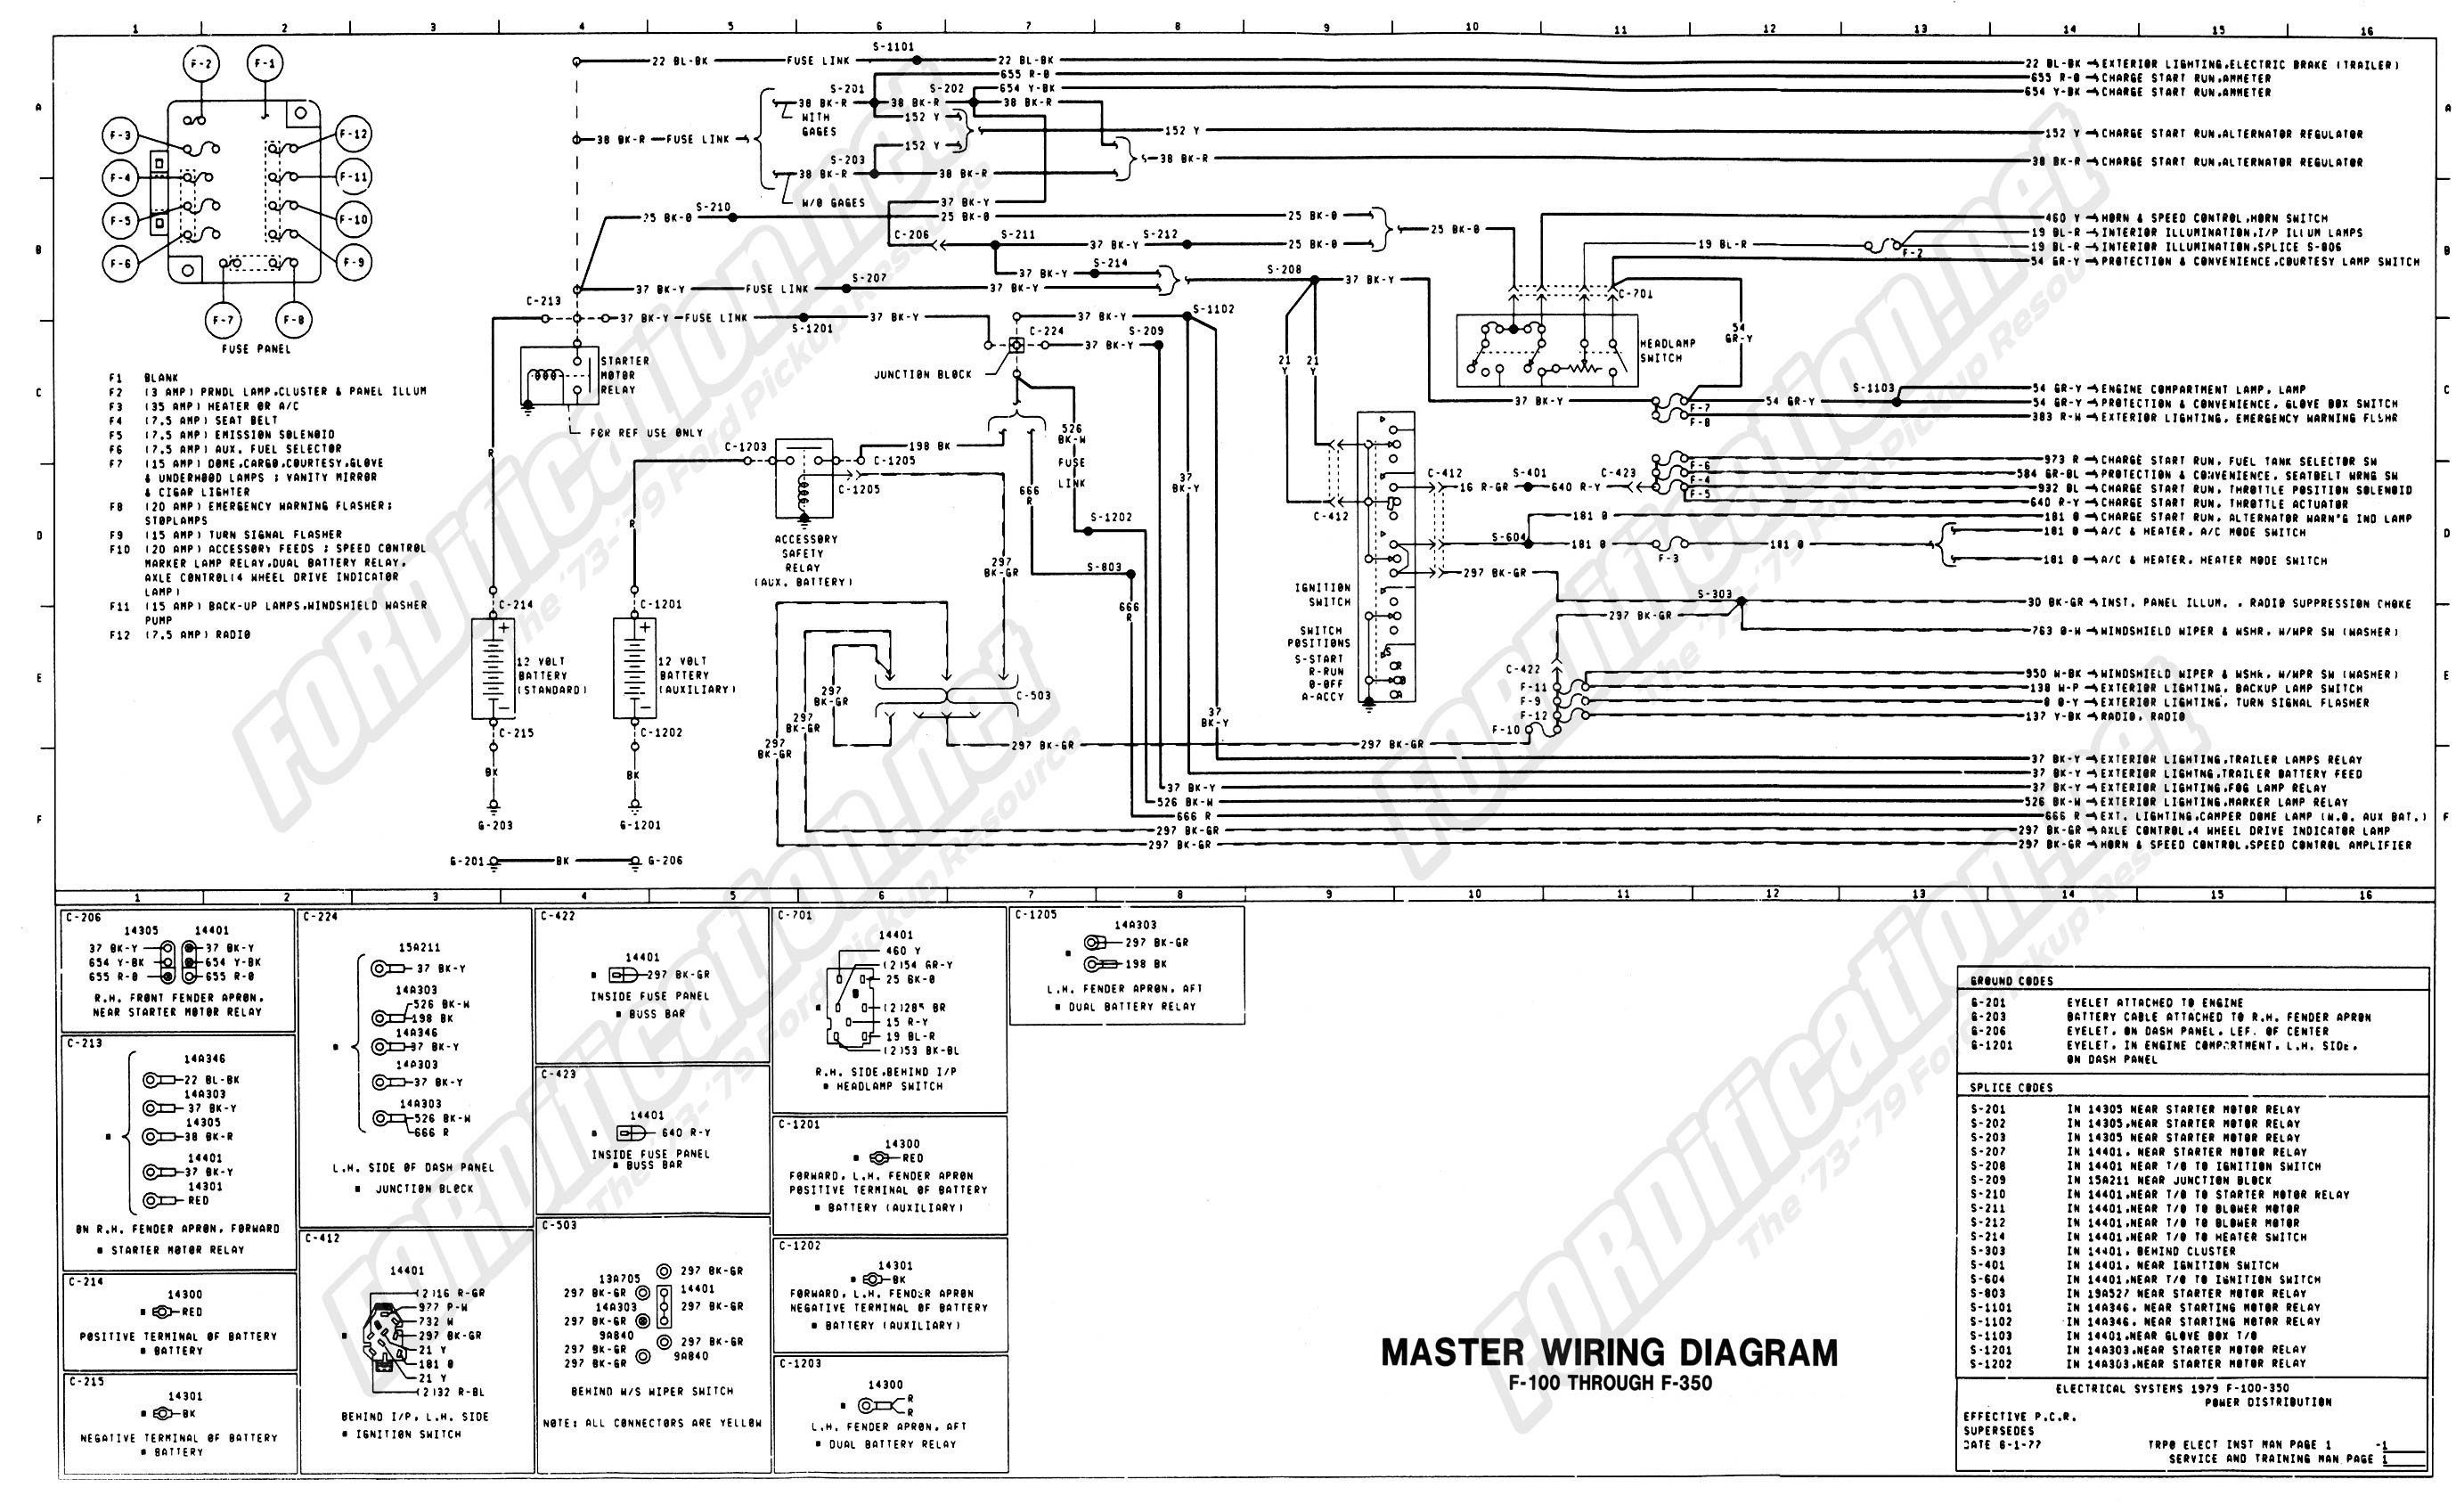 F150 Tail Light Wiring Diagram ford F150 Wiring Diagram Sample Of F150 Tail Light Wiring Diagram